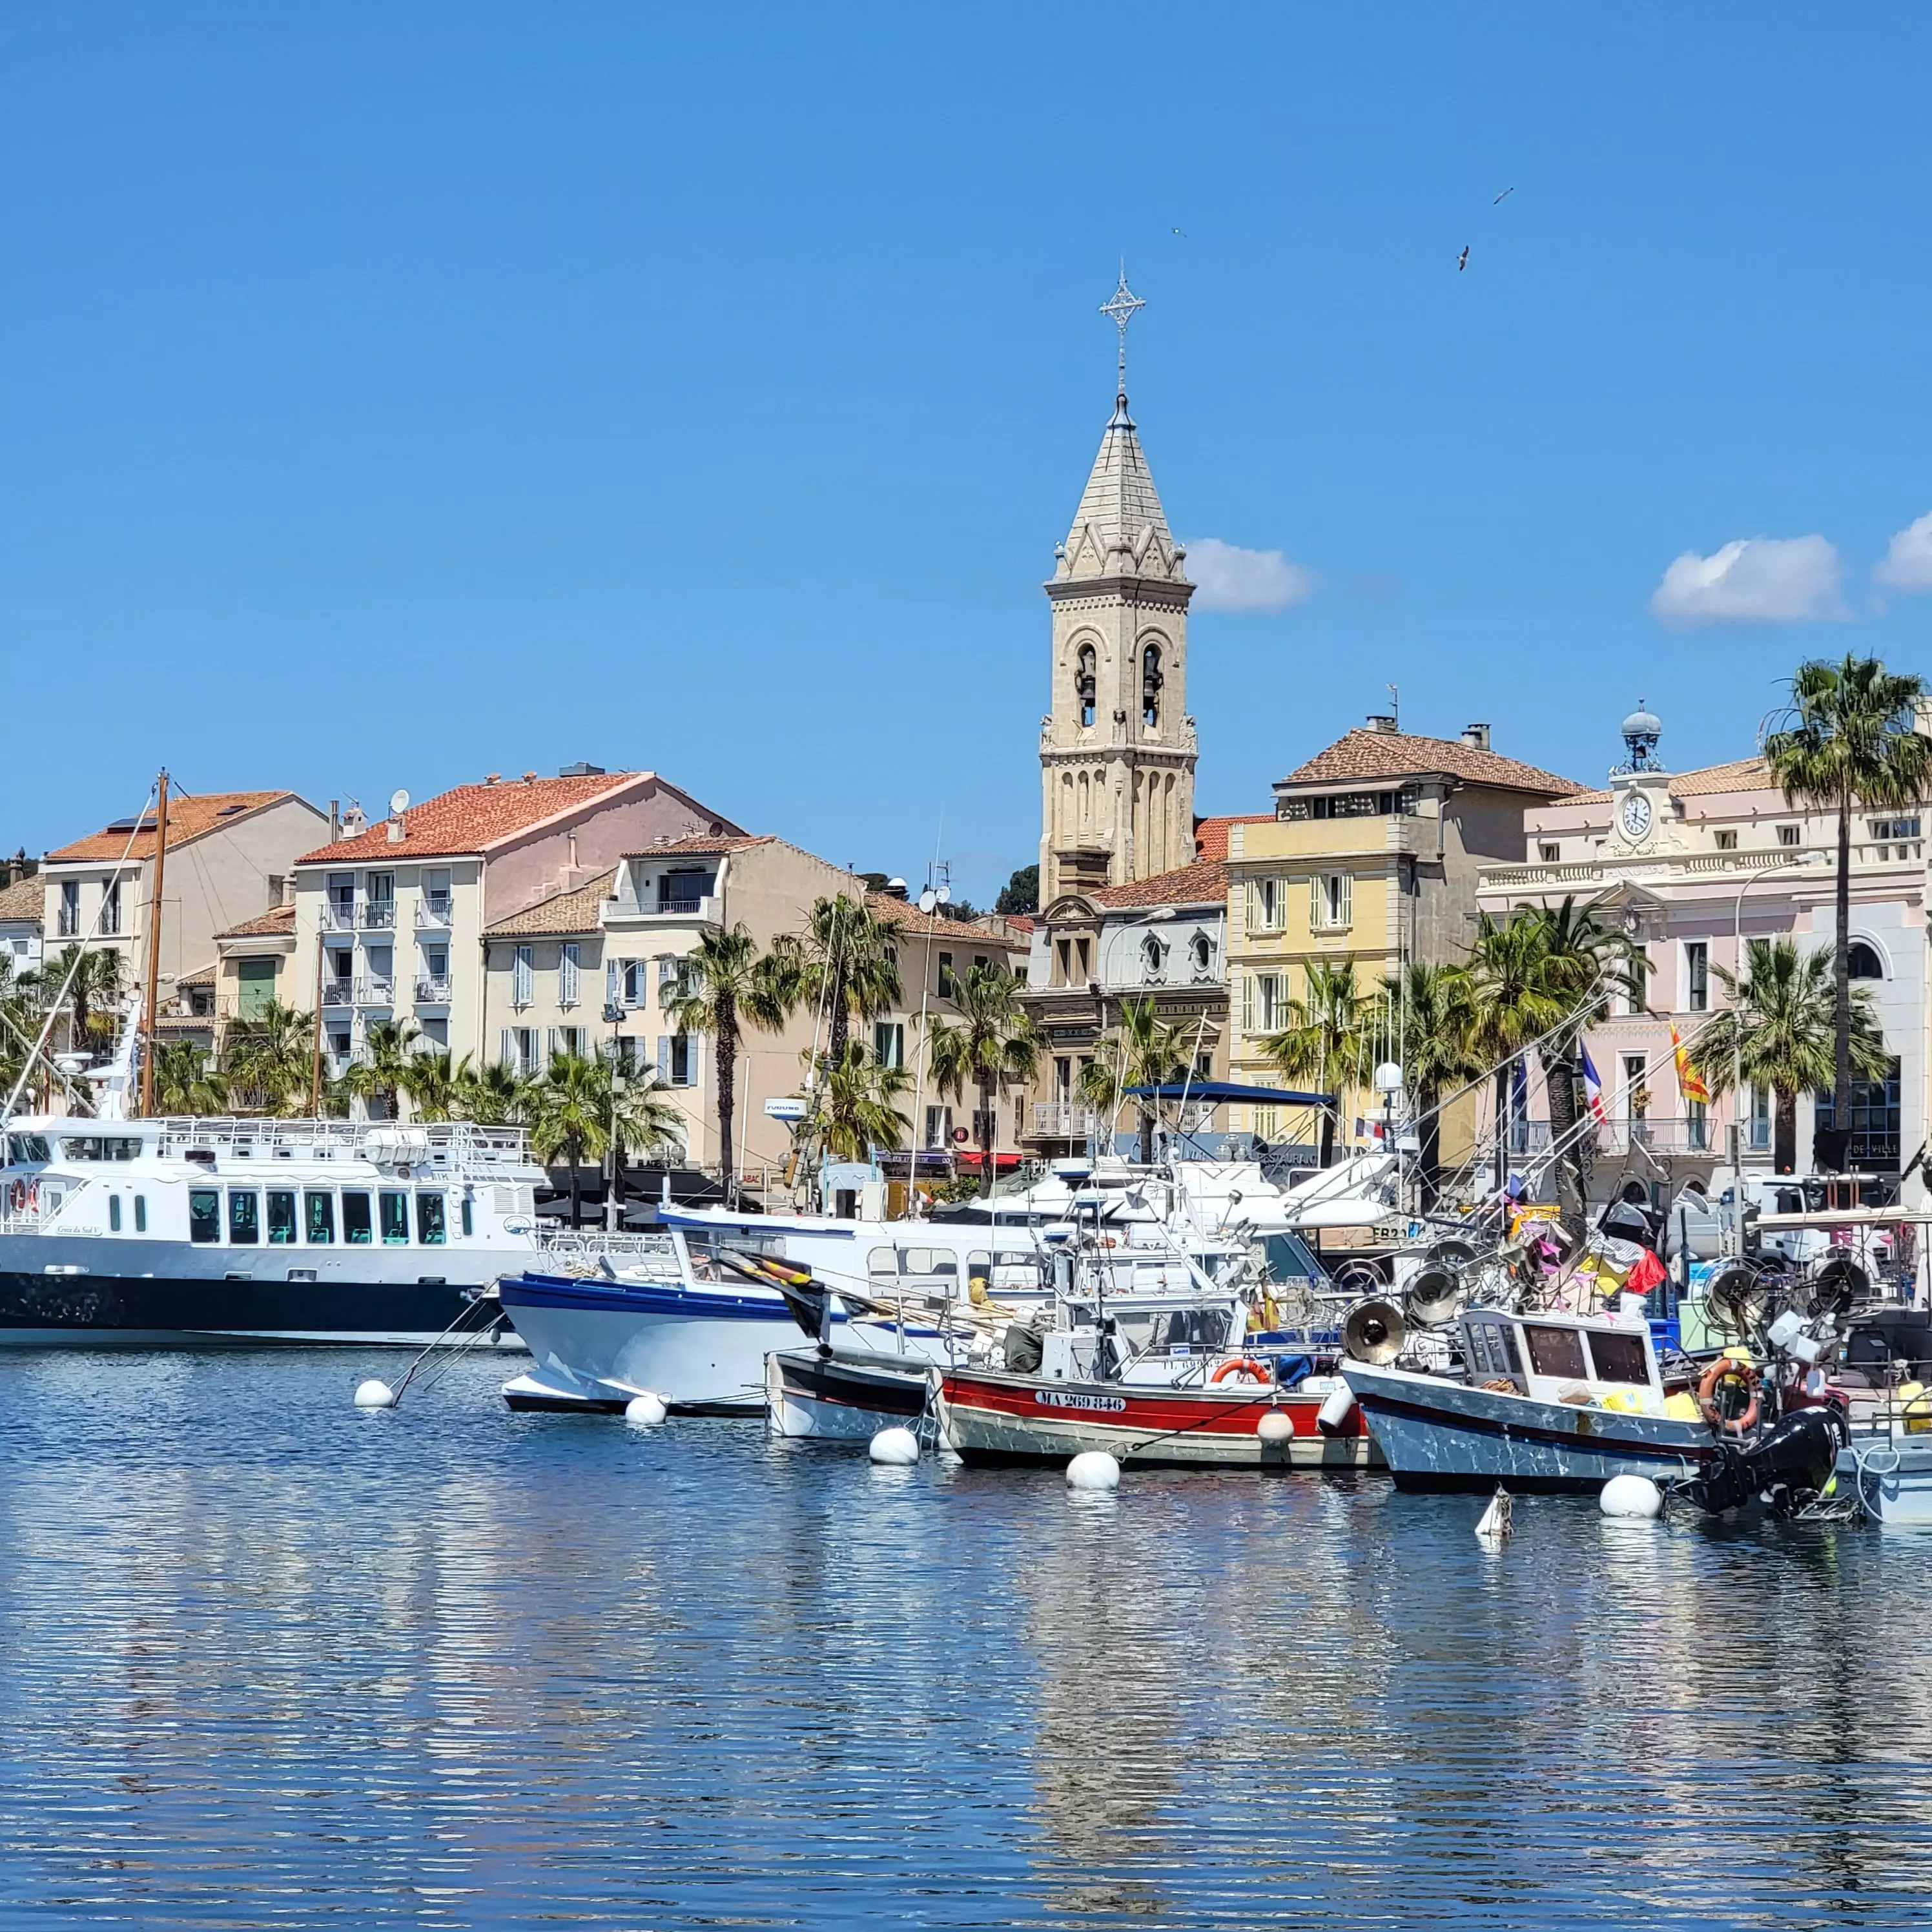 Sanary-sur-Mer in the South of France is a stop on Virgin Voyages